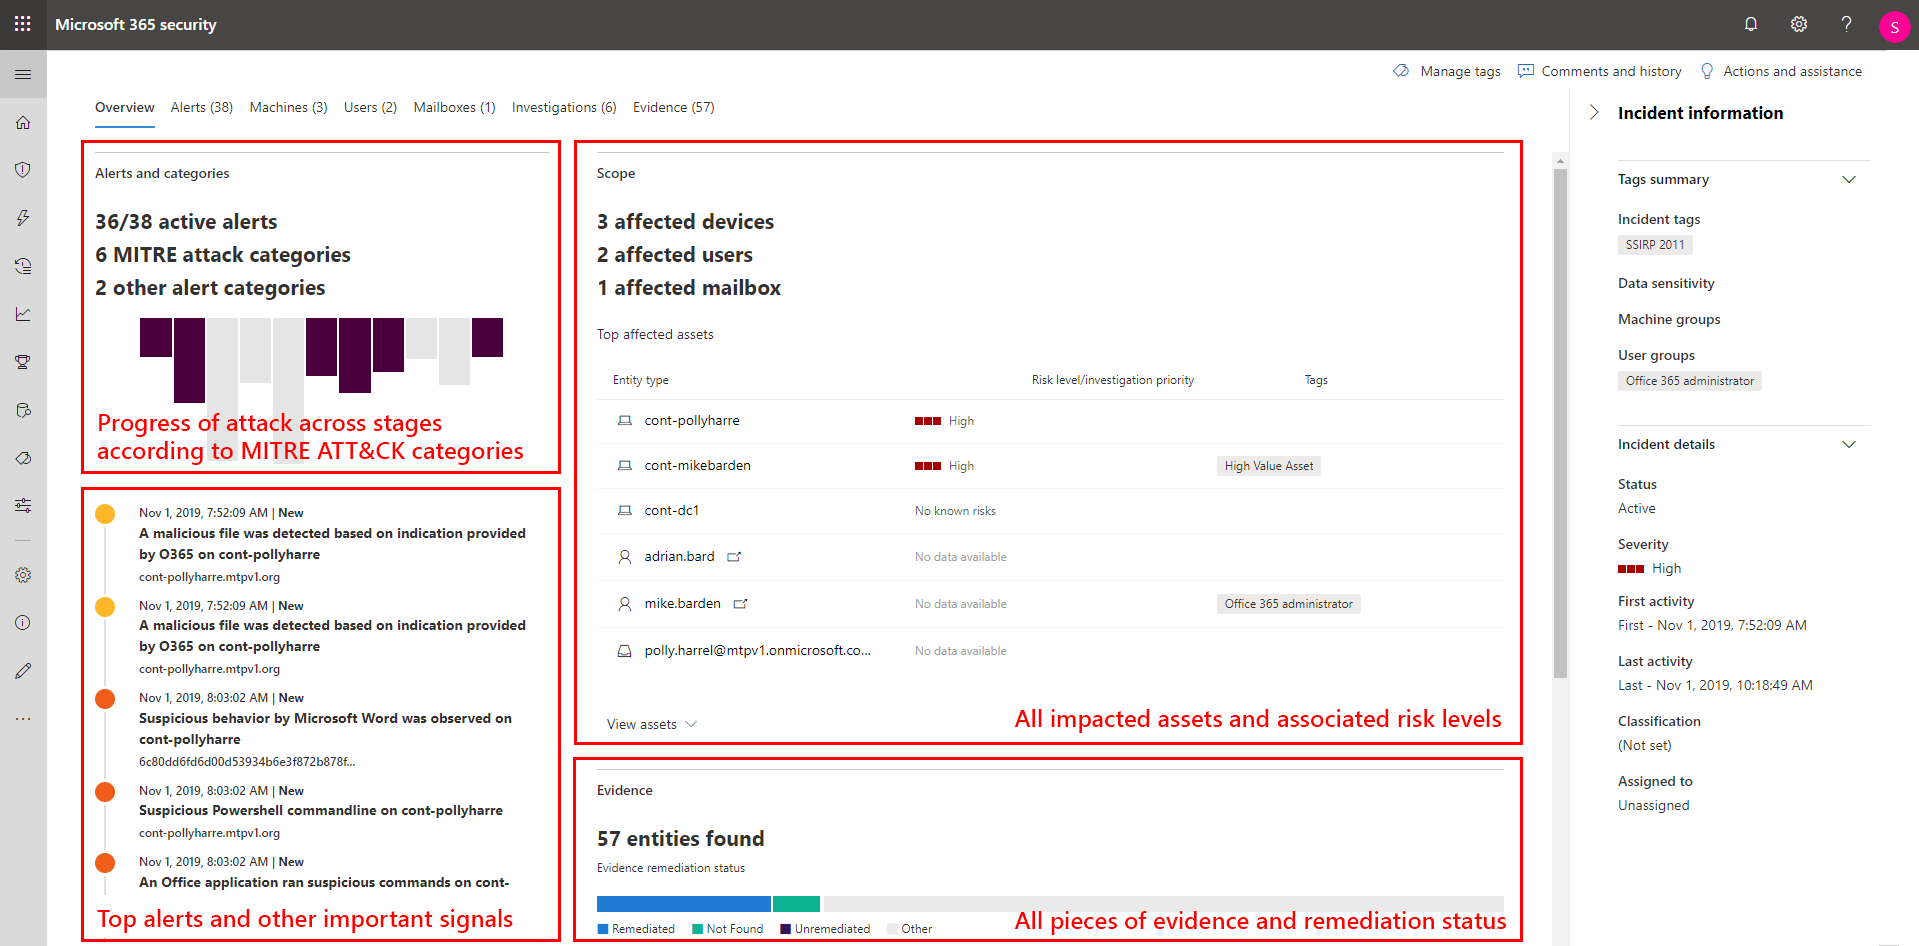 Screenshot of Microsoft 365 security center showing the overview tab of the Incidents view